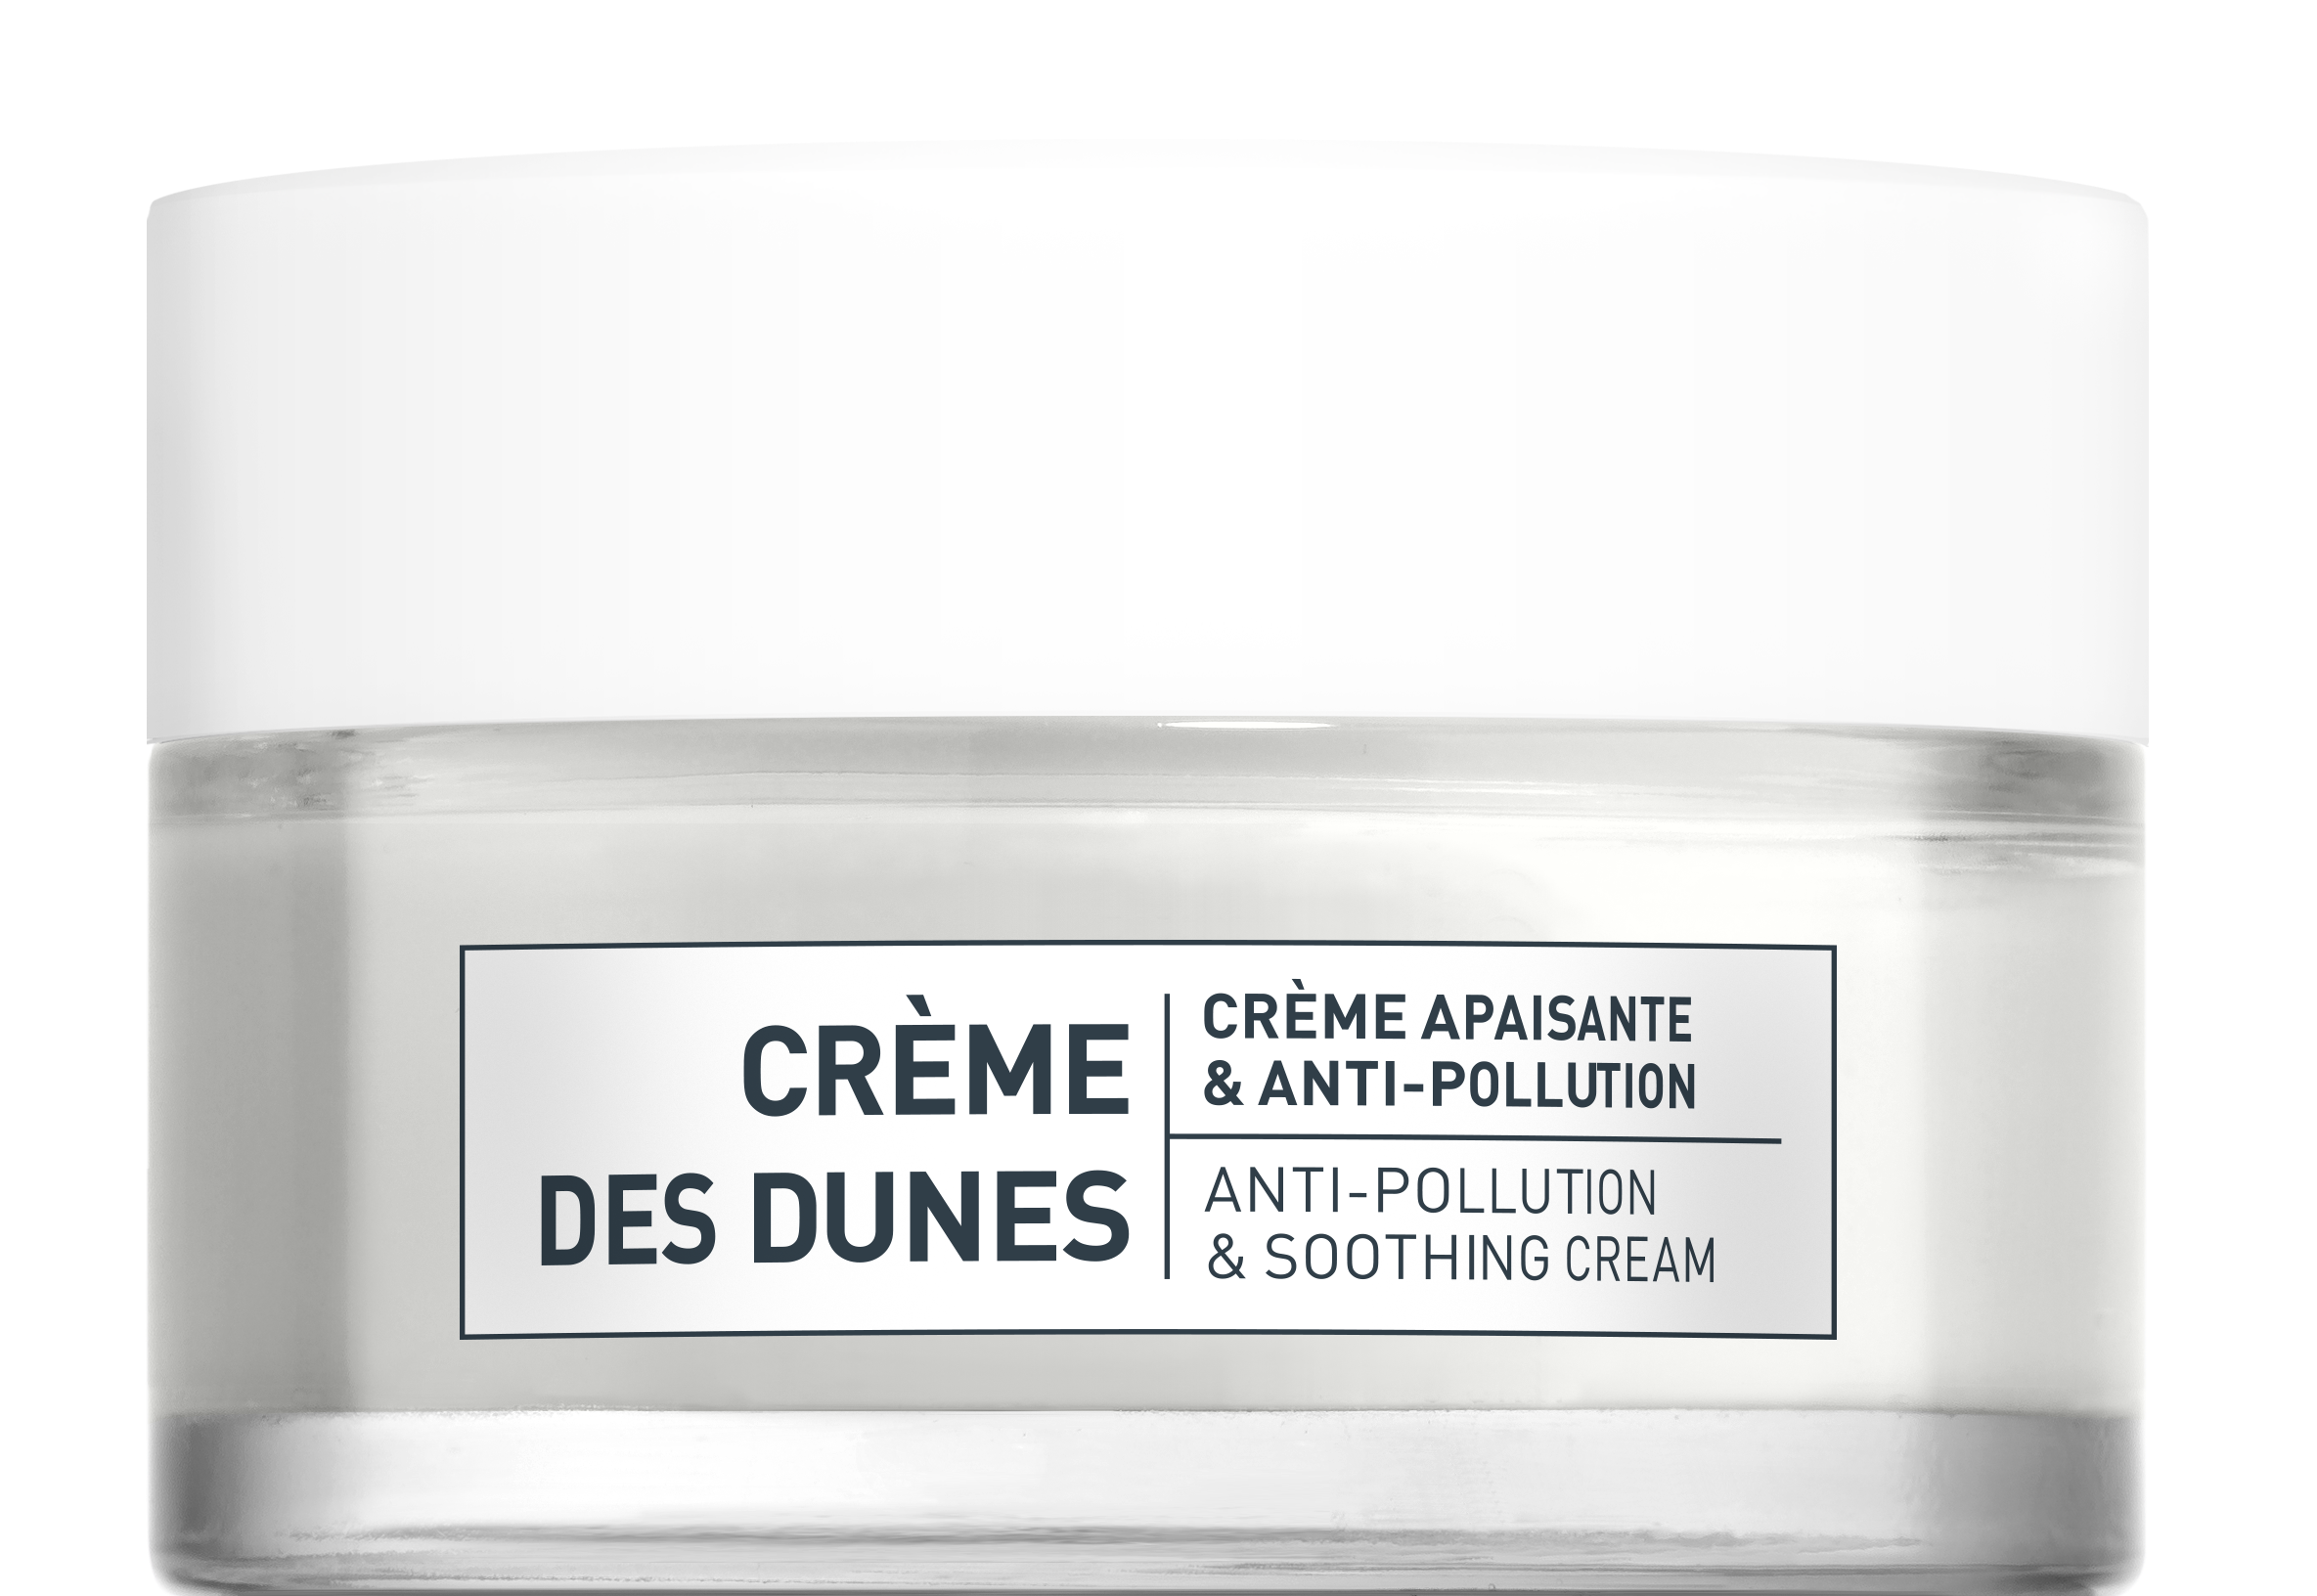 Anti-Pollution & Soothing Cream